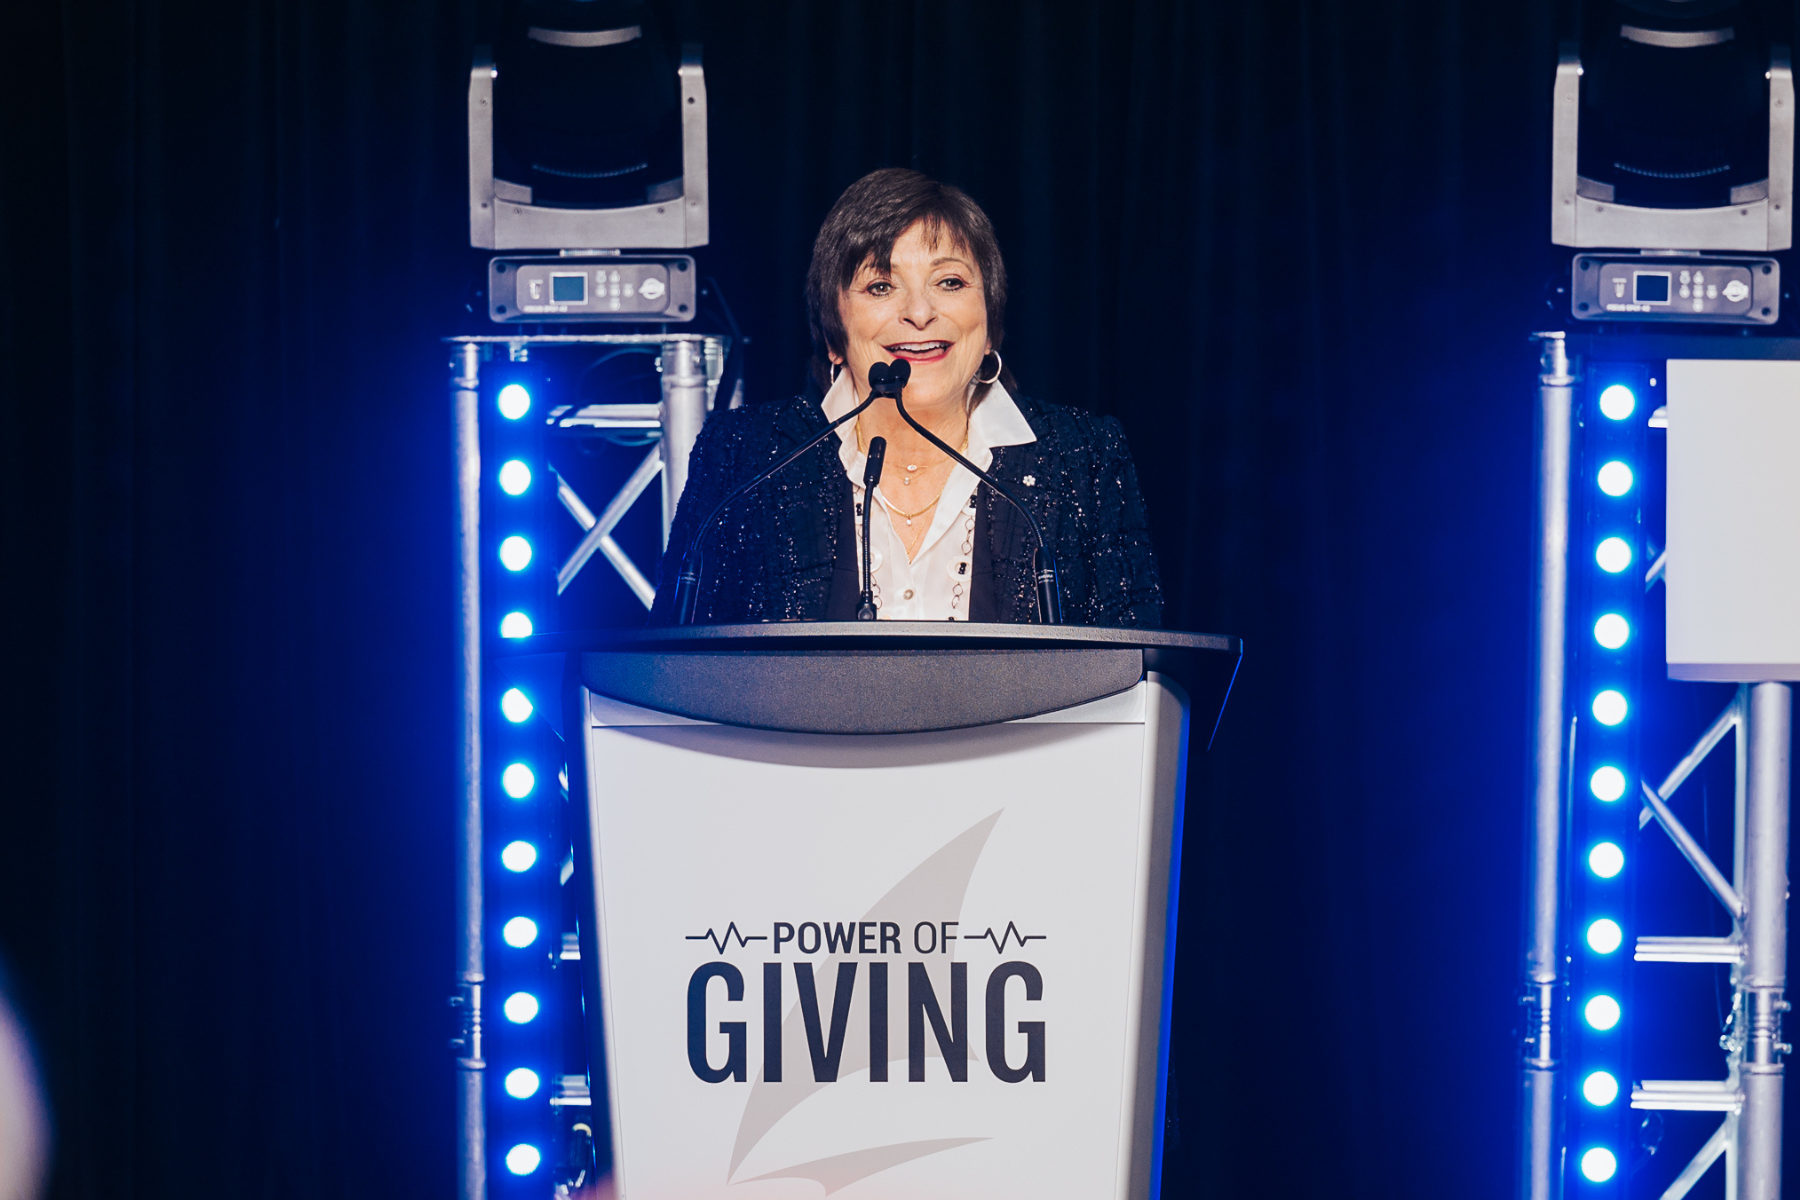 A woman with short dark hair wearing a white shirt and black sparkly jacket is speaking at a podium with the words Power of Giving on it.